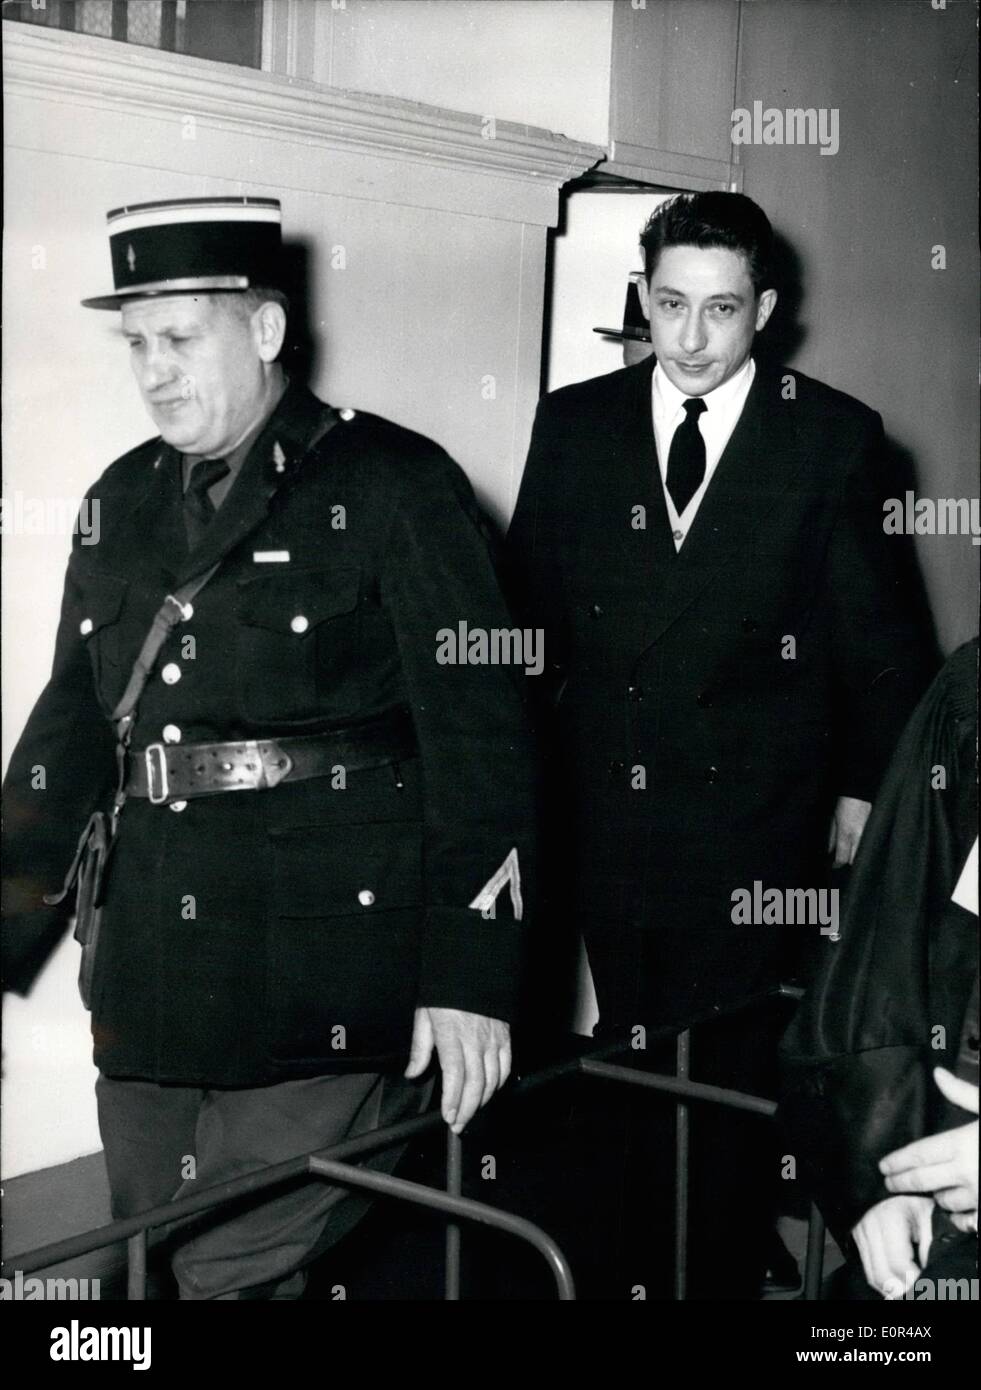 Dec. 12, 1957 - Francis Bodenan tried for double murder; Francis Bodenan involved in the murder of two Paris tradesmen Louis Robinard and David Saban at Montfort L'Amaury, near Paris, last year, appeared before the Versailles court of assizes today. Photo Shows Francis Bodenan arrives under Escort in the court room. Stock Photo